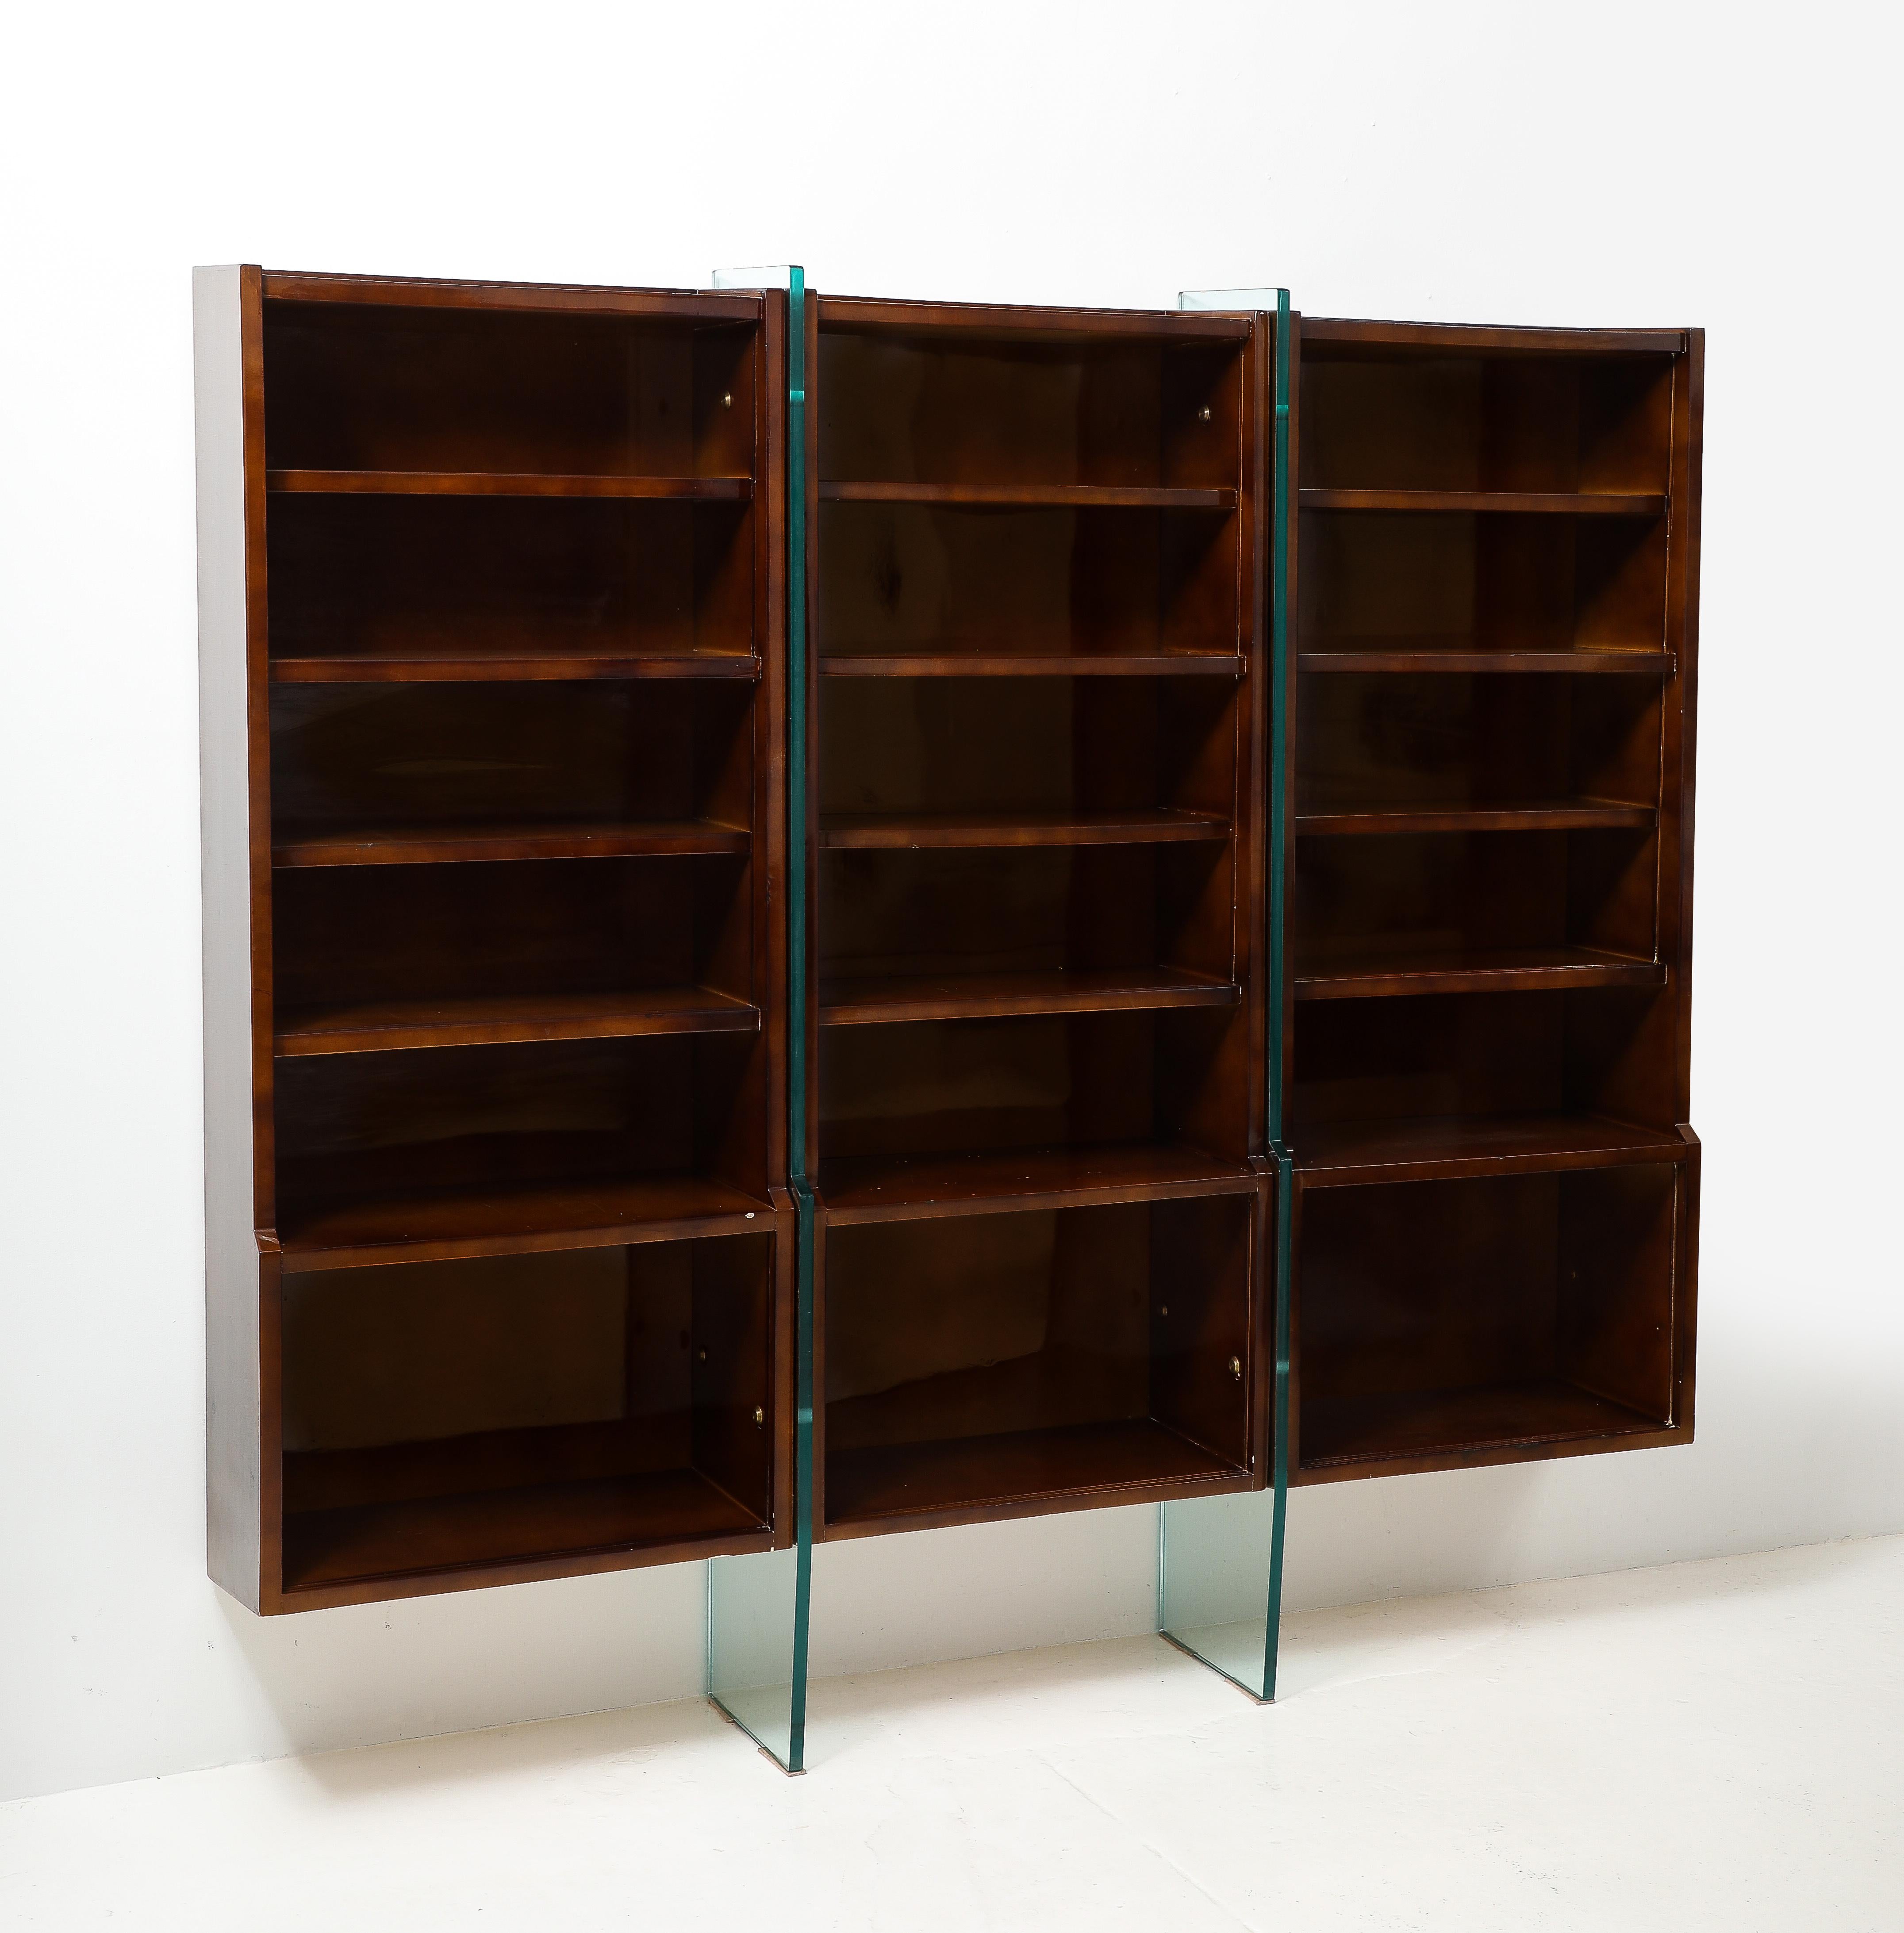 Raphael Raphel Bookcase in Lacquered Wood & Glass, France 1950's For Sale 4